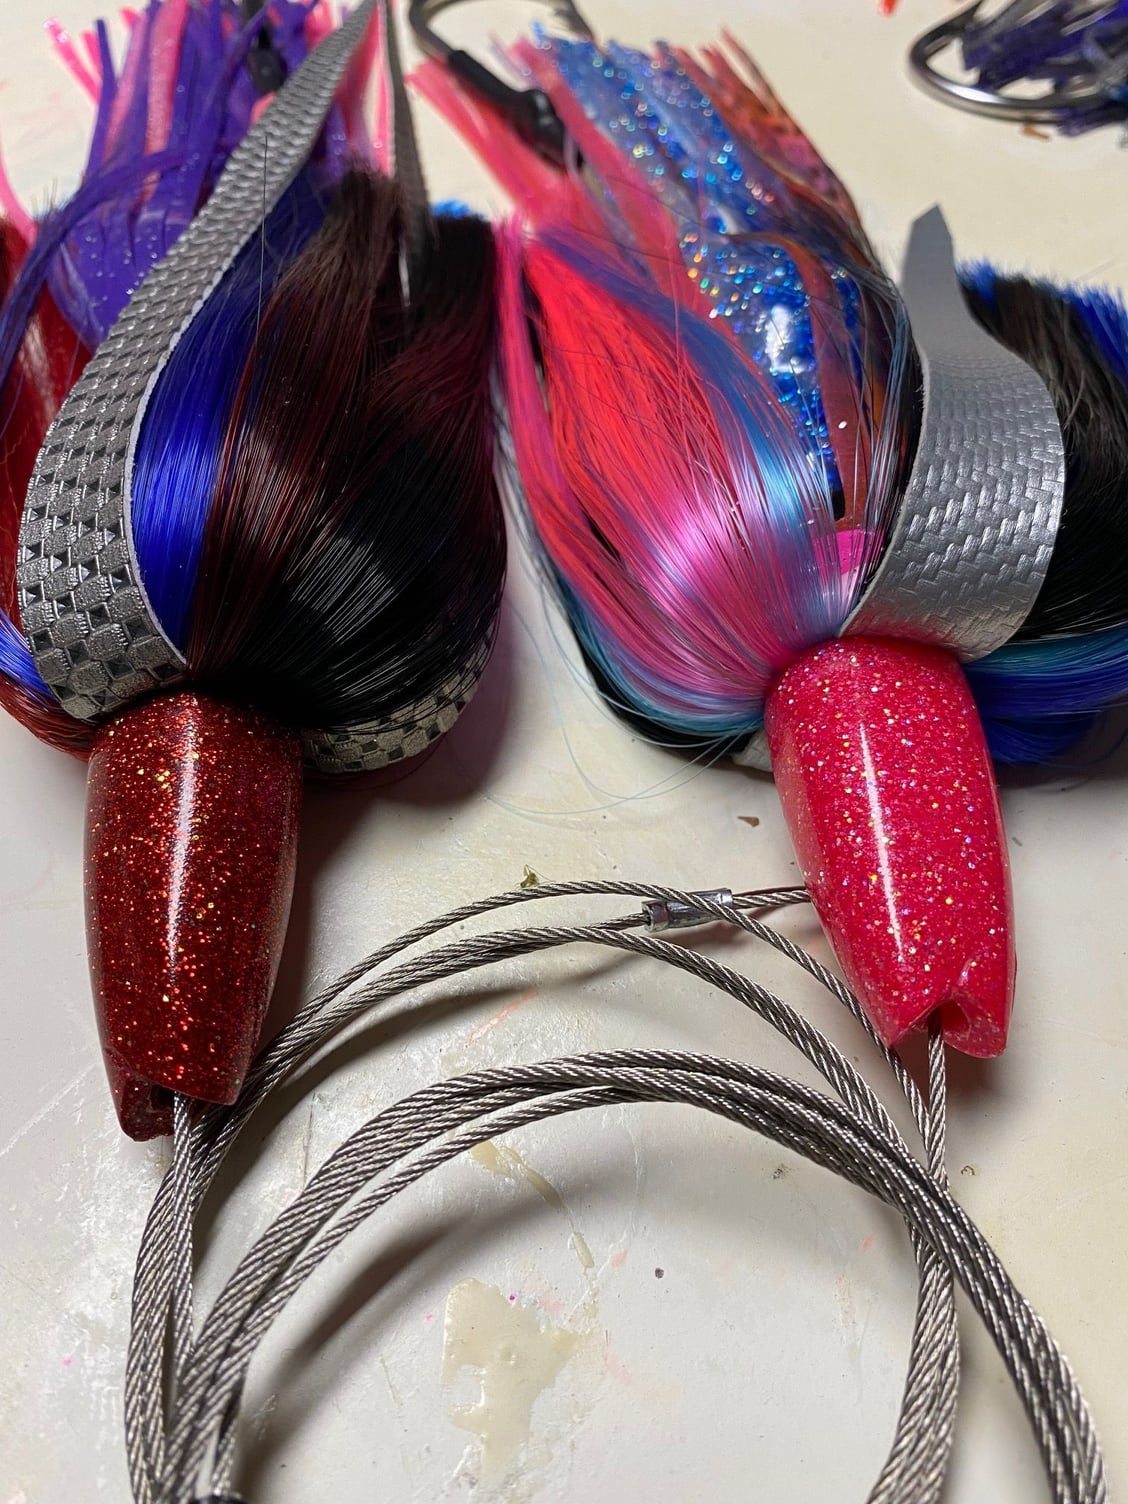 Wts trolling lures - The Hull Truth - Boating and Fishing Forum